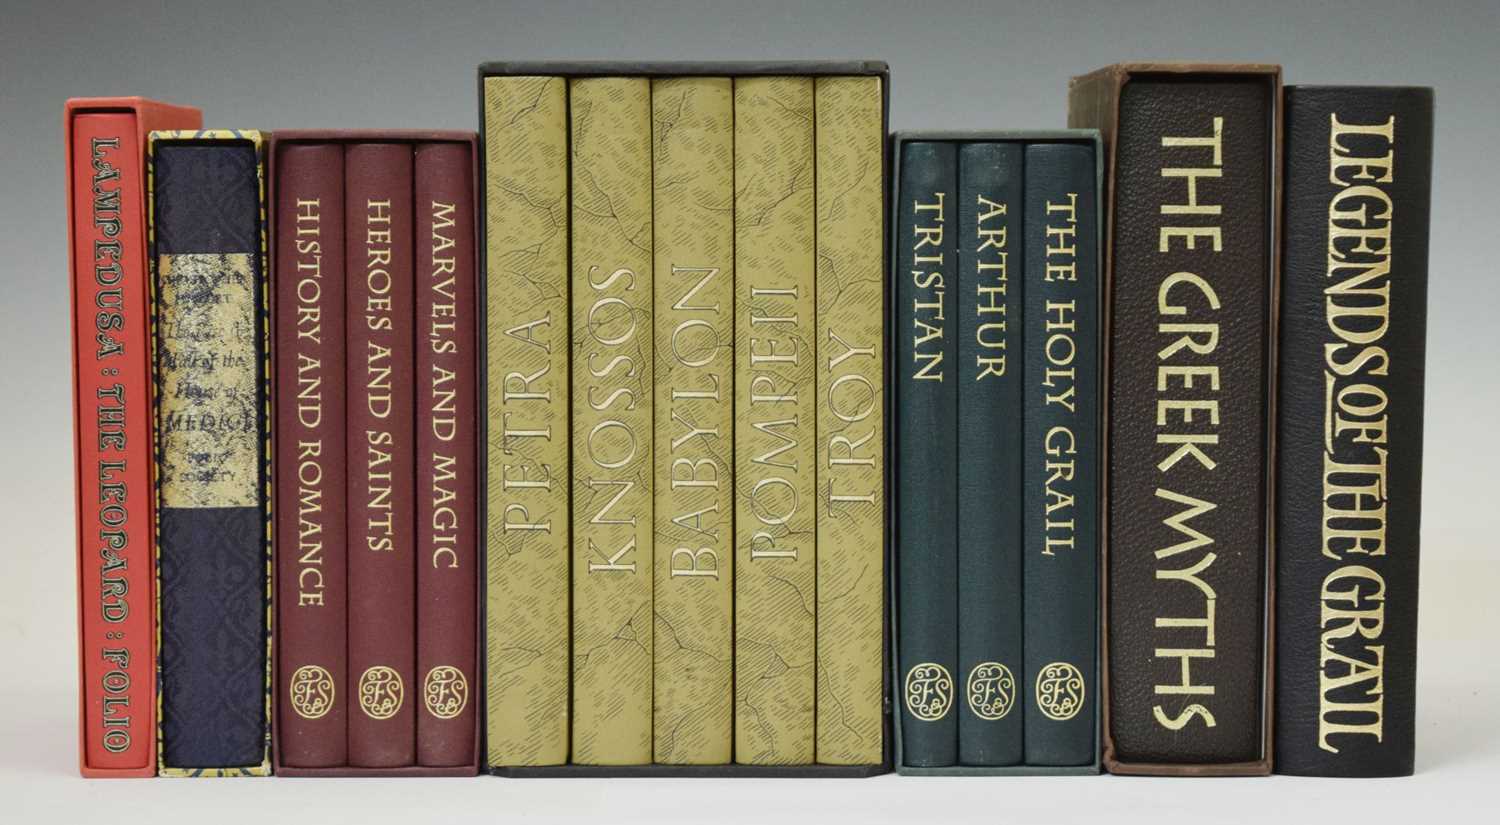 Collection of Folio Society volumes - Legends and Myths, etc